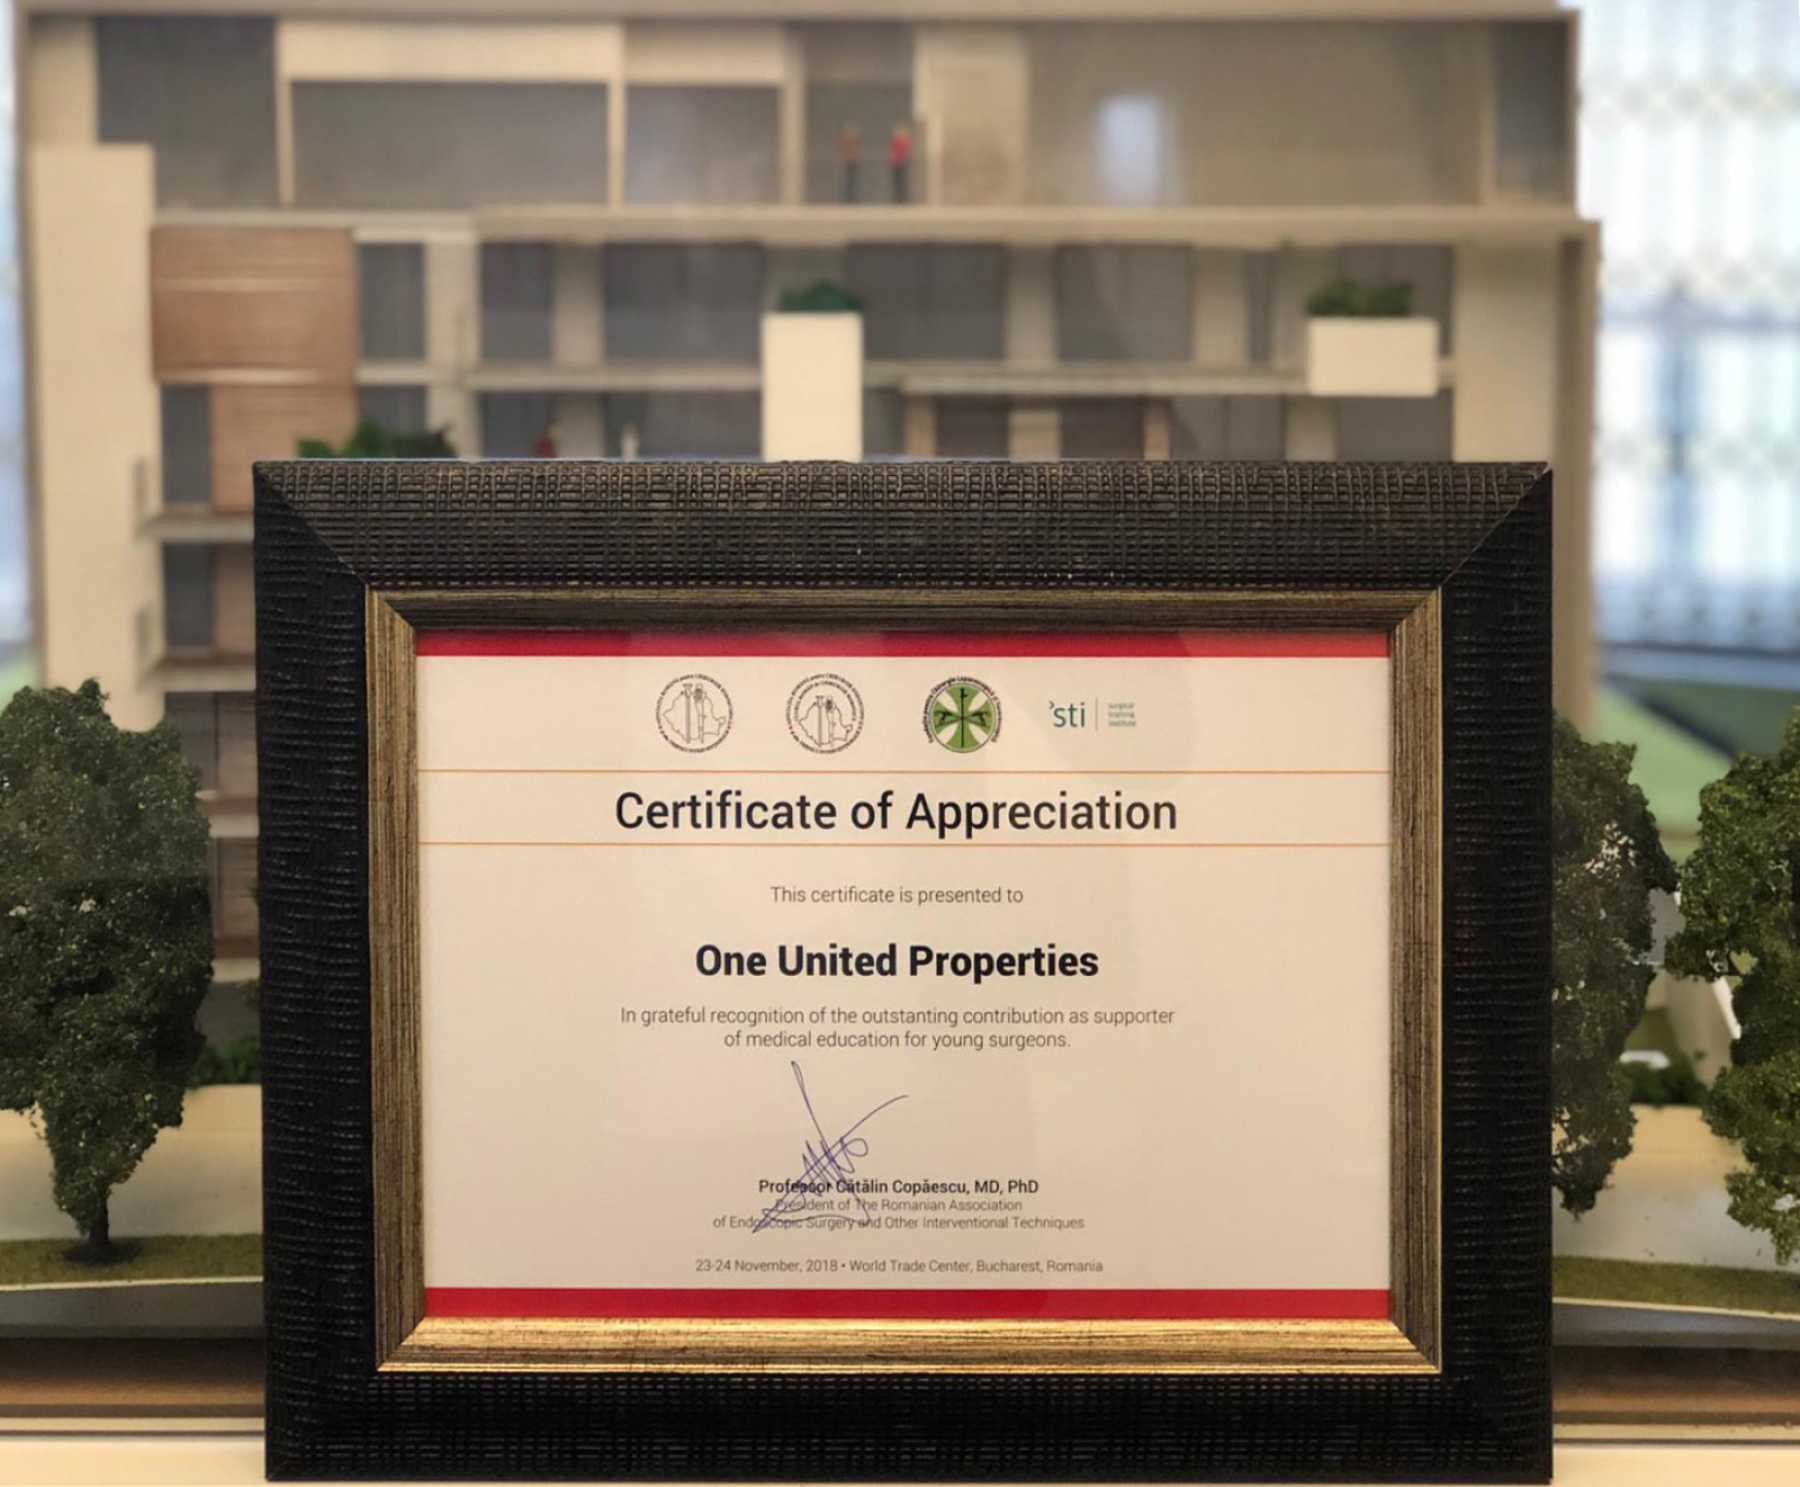 One United Properties to receive the ARCE Certificate of Appreciation